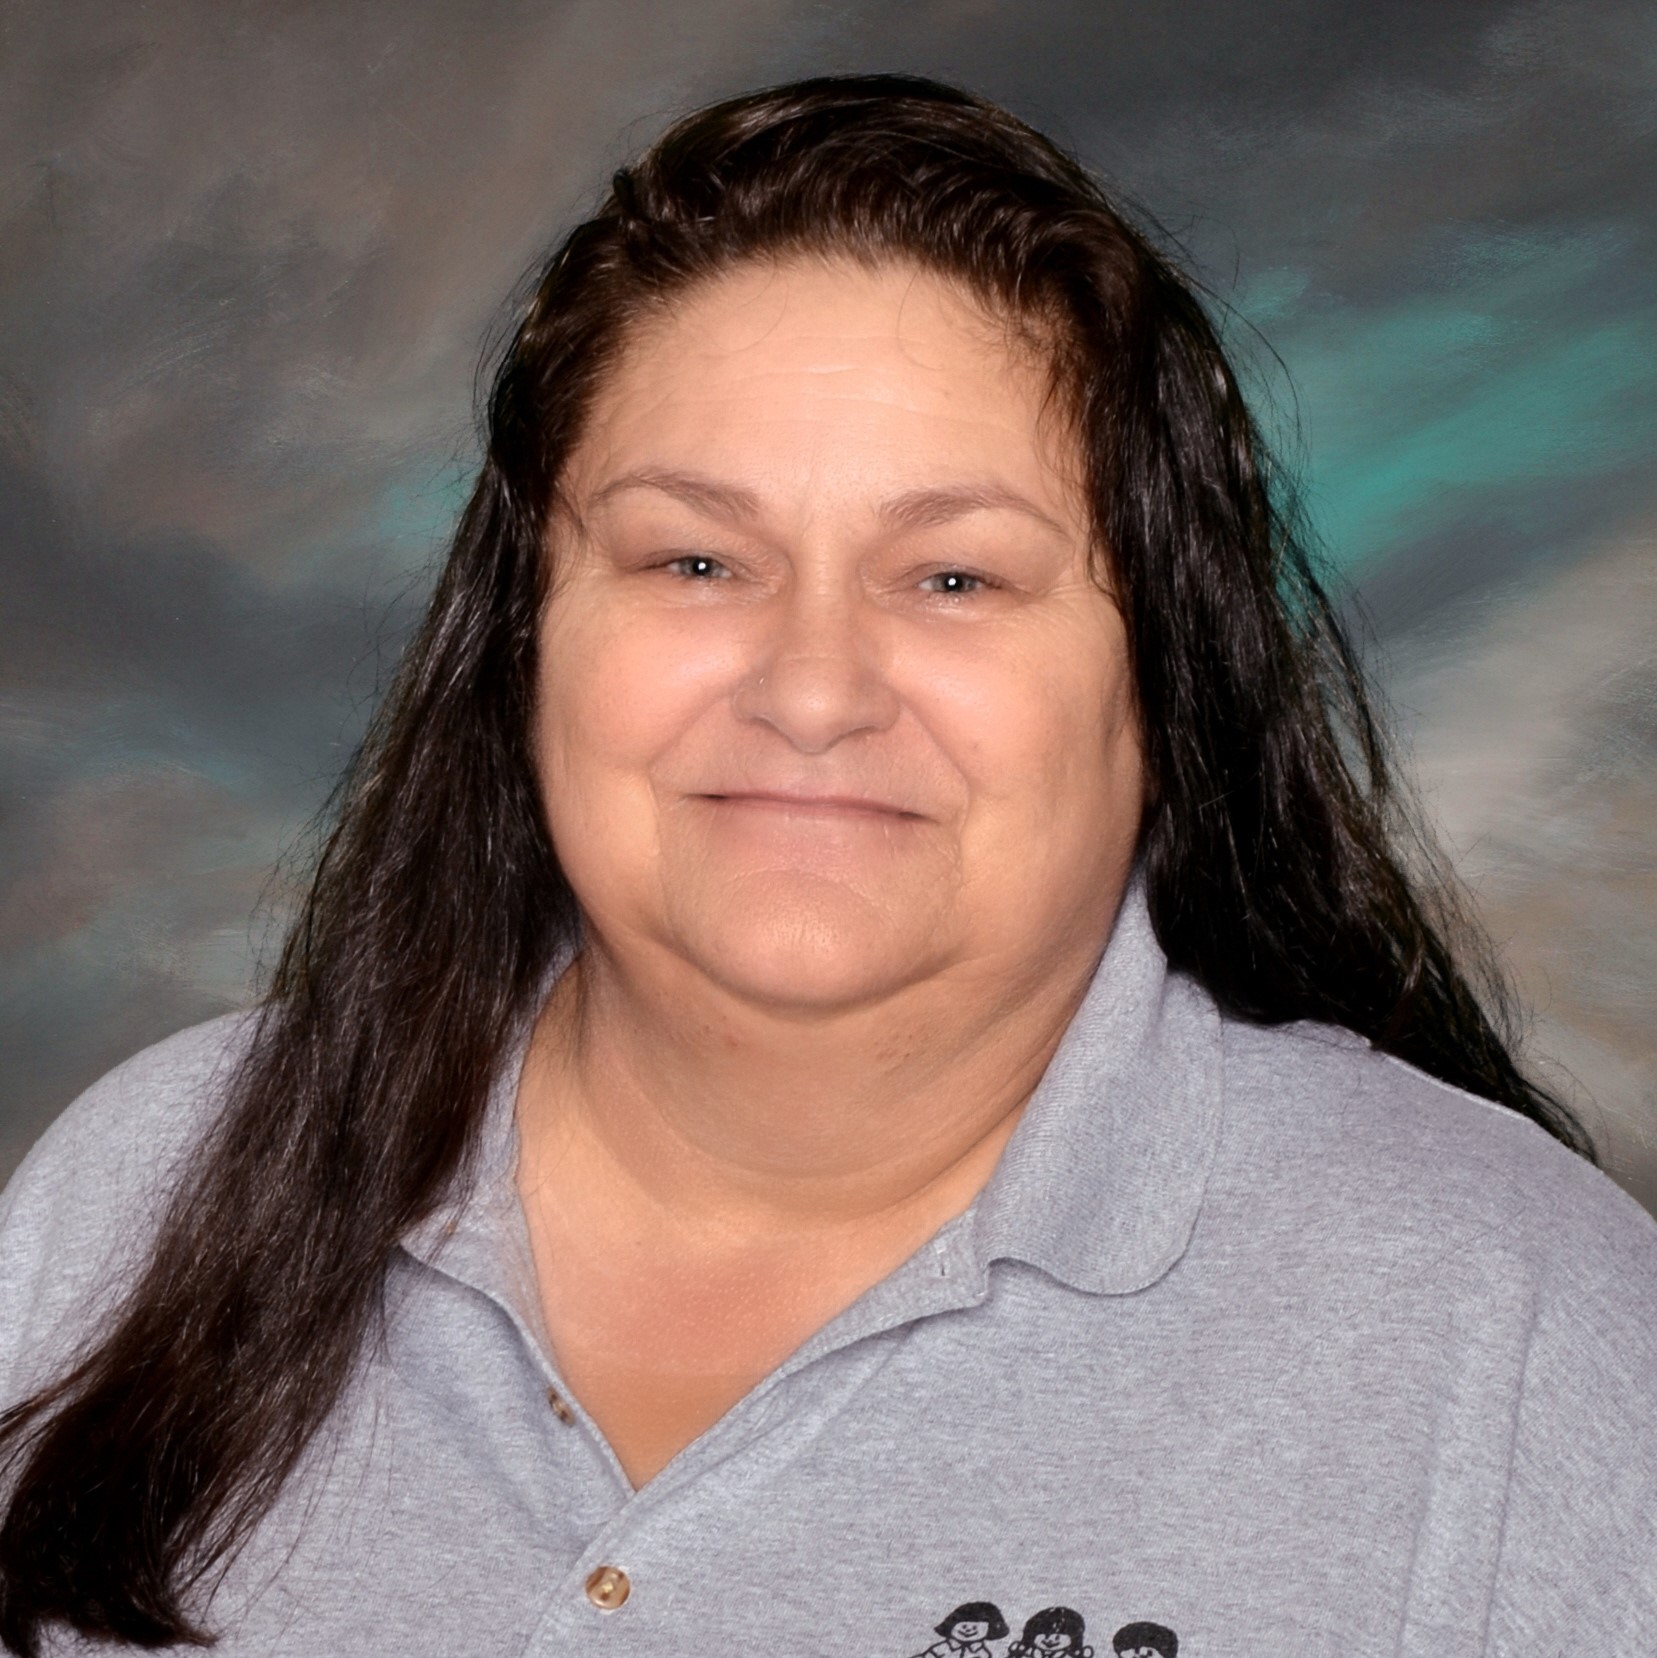 Photo of Lori-Cassen-Snyder, Classified Employee of the Year